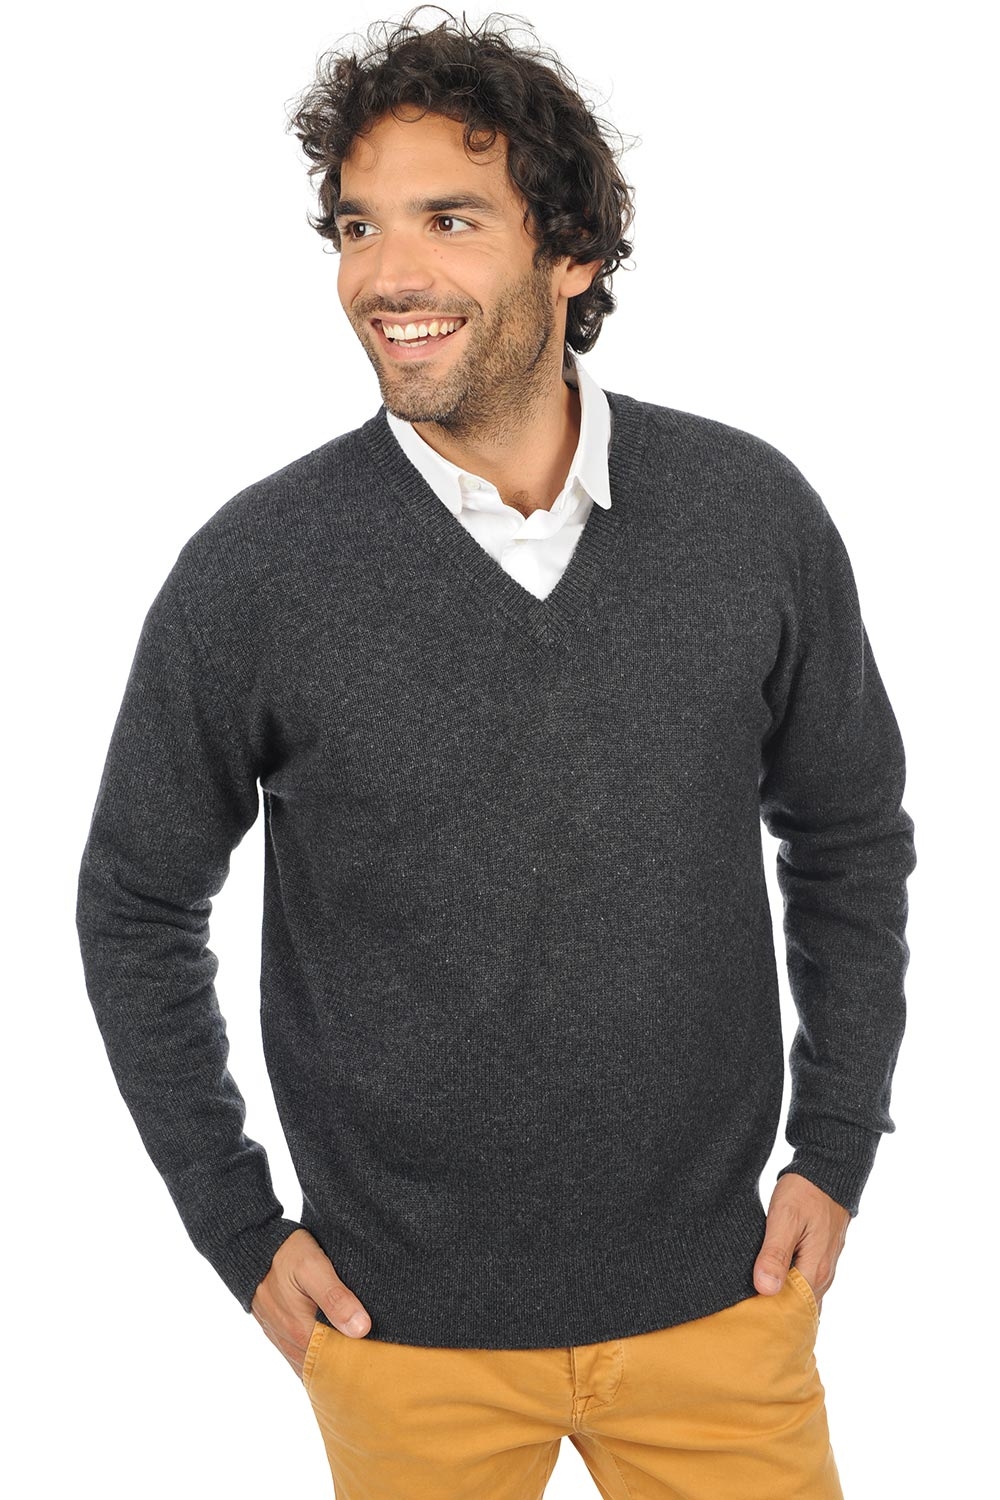 Cashmere men chunky sweater hippolyte 4f charcoal marl 4xl